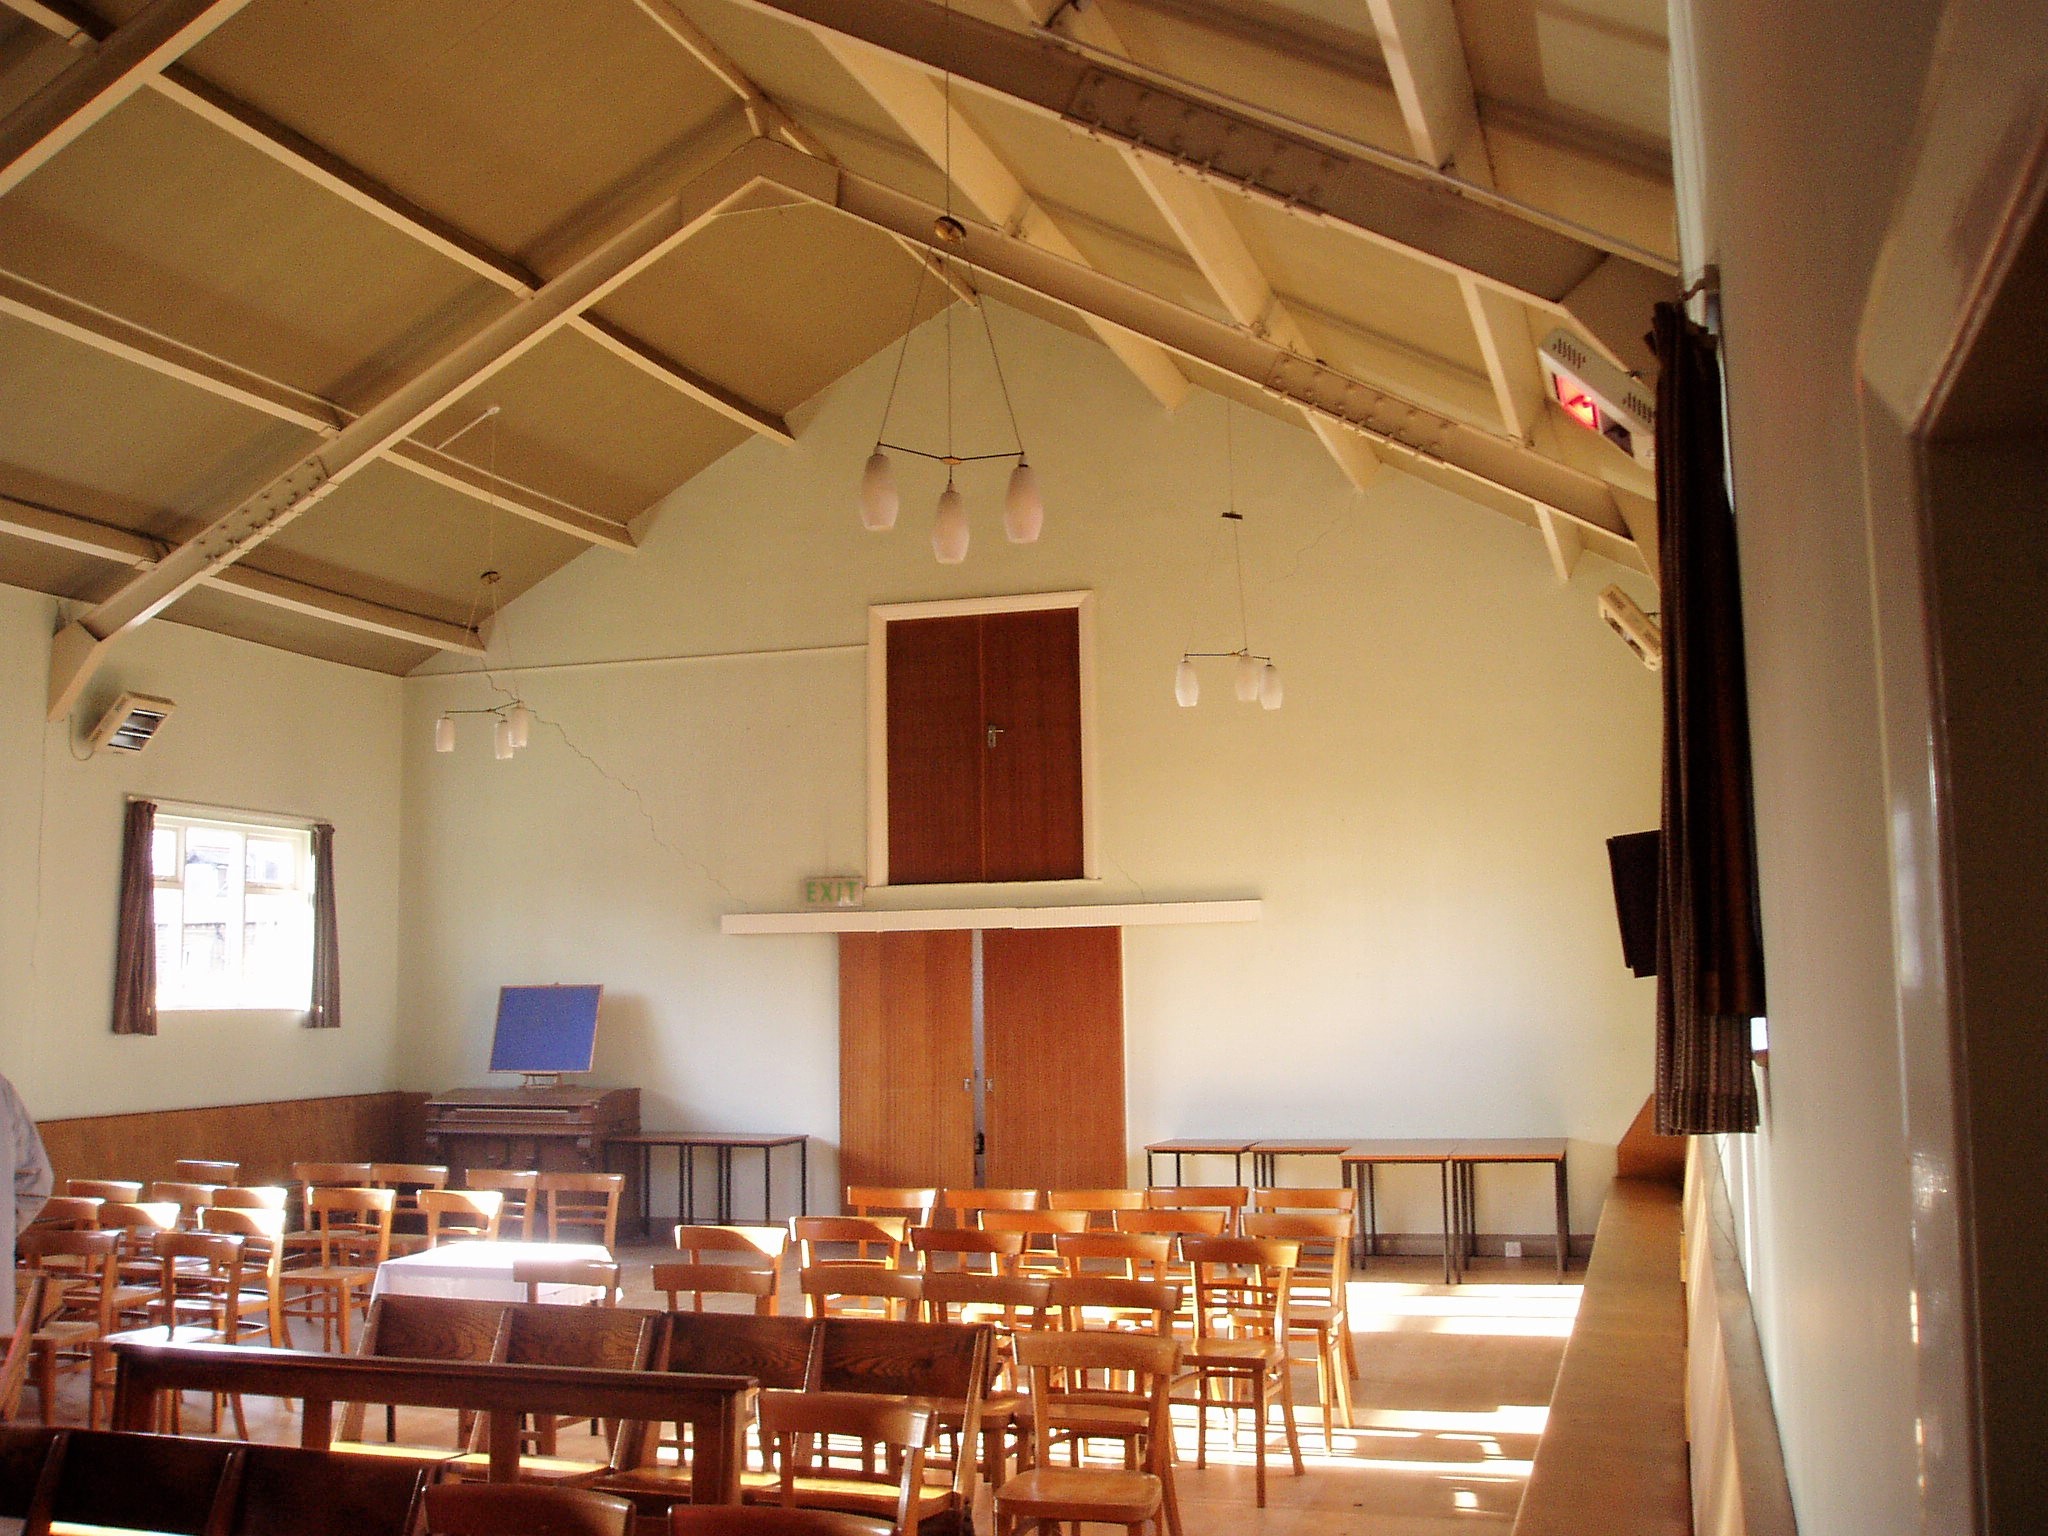 A church hall with exposed beams